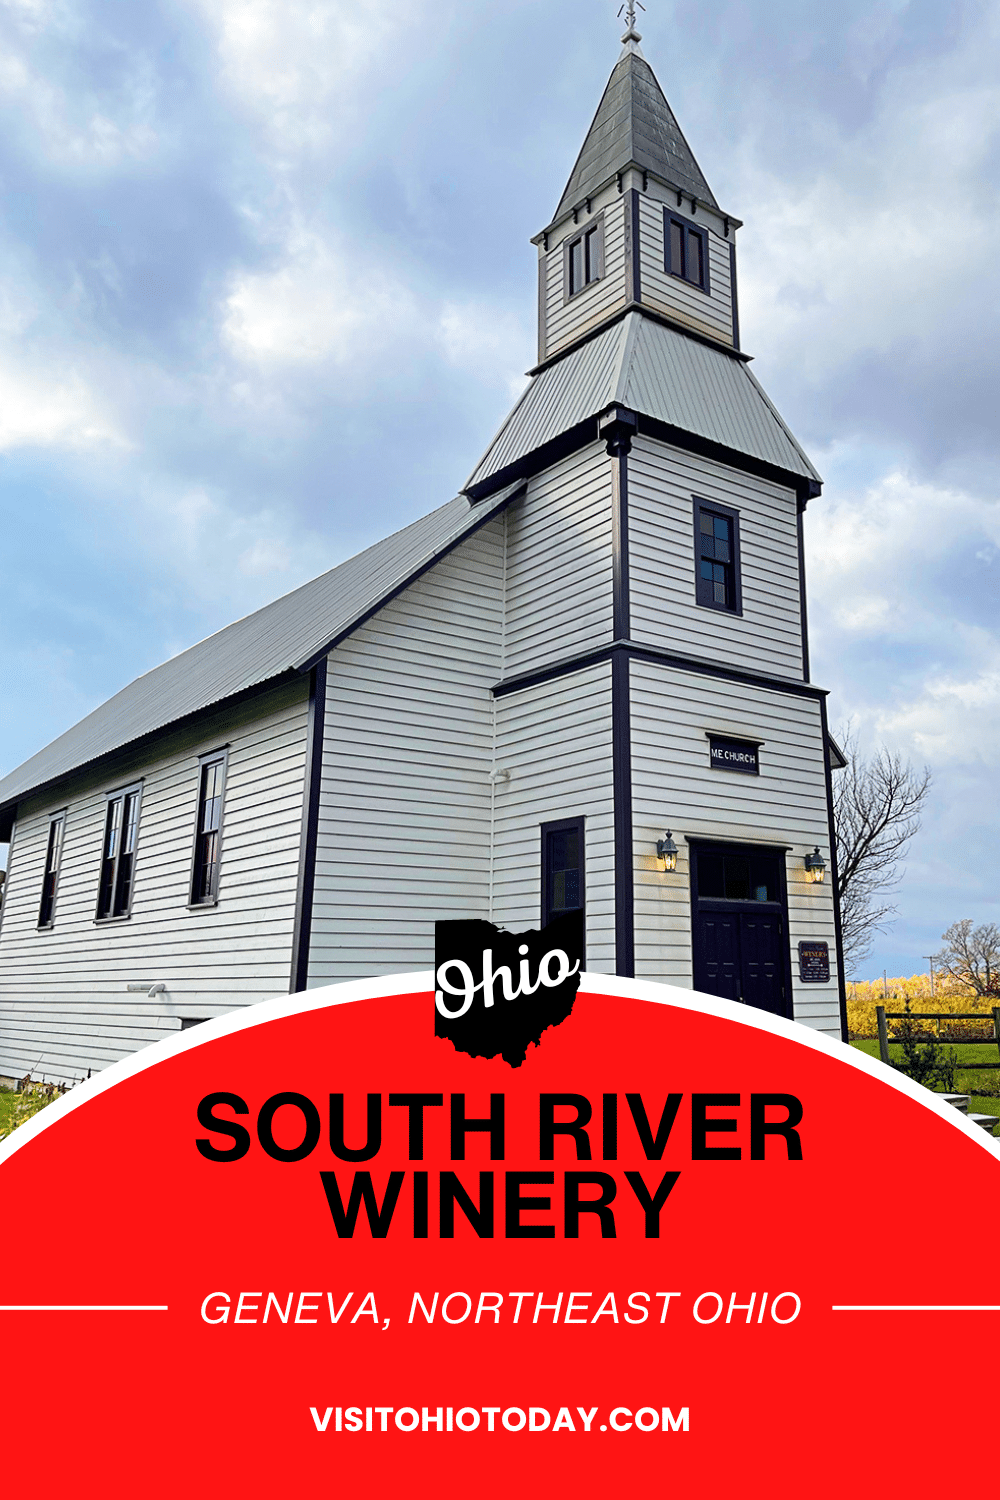 South River Winery is a beautiful century old church that was moved from Shalersville, Ohio to its current location in the Grand River Valley. South River Winery has a variety of wines from sweet to dry that can be enjoyed either inside the unique South River Winery tasting room while sitting in a church pew or on the grounds under the pavilion or while roaming through the South River Winery itself. @southriverwinery #genevaohio #ohiowineries